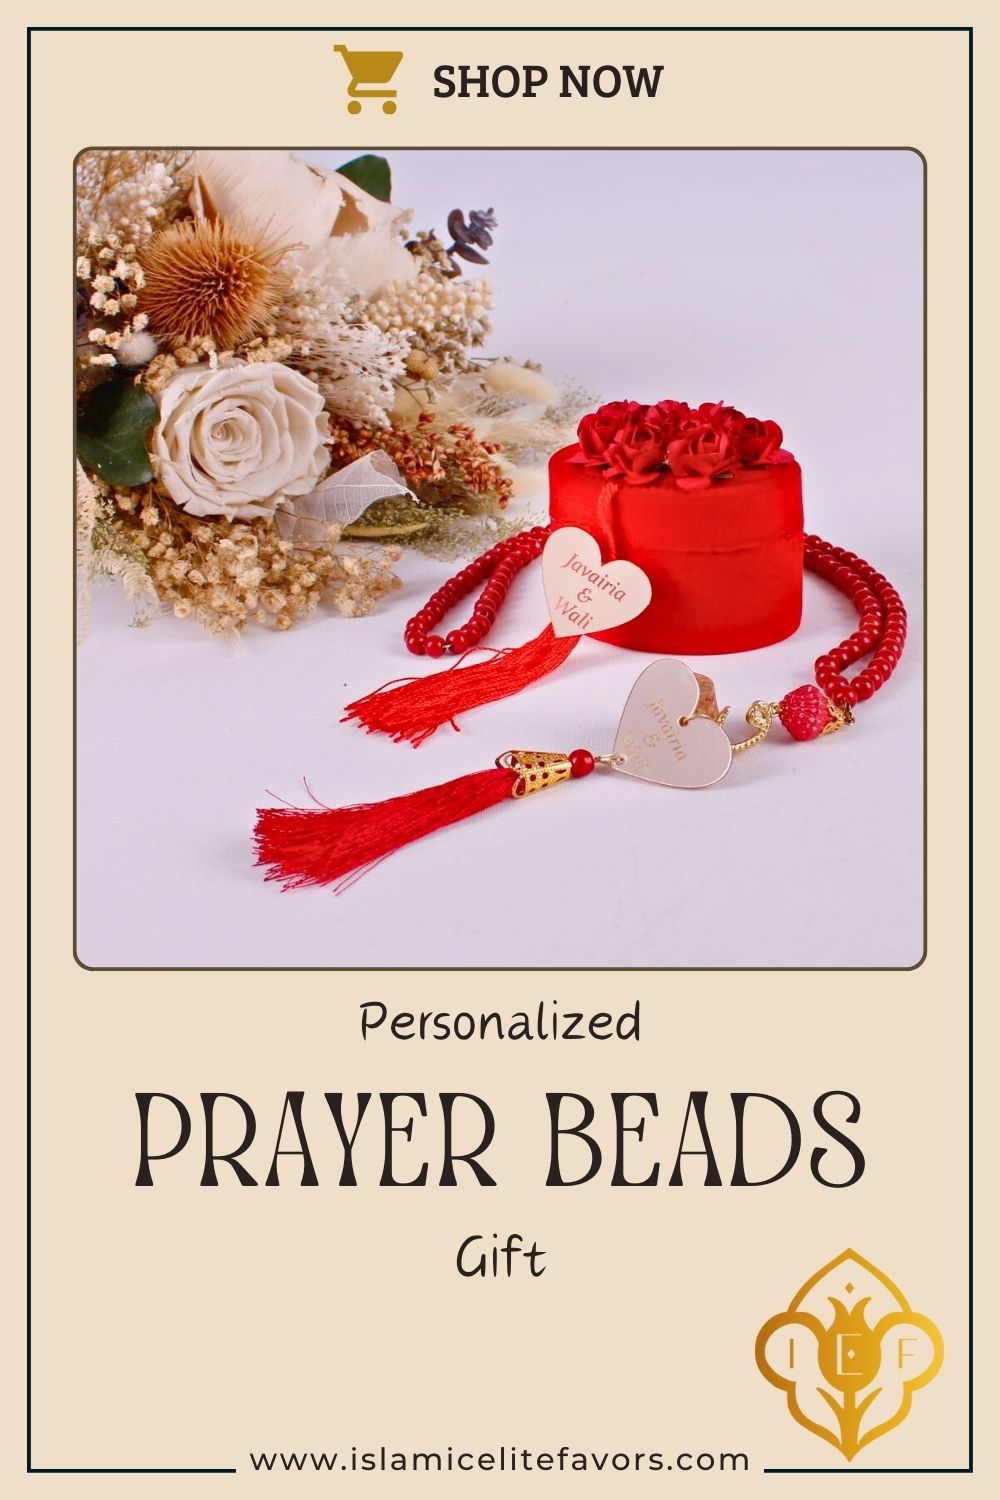 Personalized Velvet Box Pearl Prayer Beads Tasbeeh Wedding Favors - Islamic Elite Favors is a handmade gift shop offering a wide variety of unique and personalized gifts for all occasions. Whether you're looking for the perfect Ramadan, Eid, Hajj, wedding gift or something special for a birthday, baby shower or anniversary, we have something for everyone. High quality, made with love.